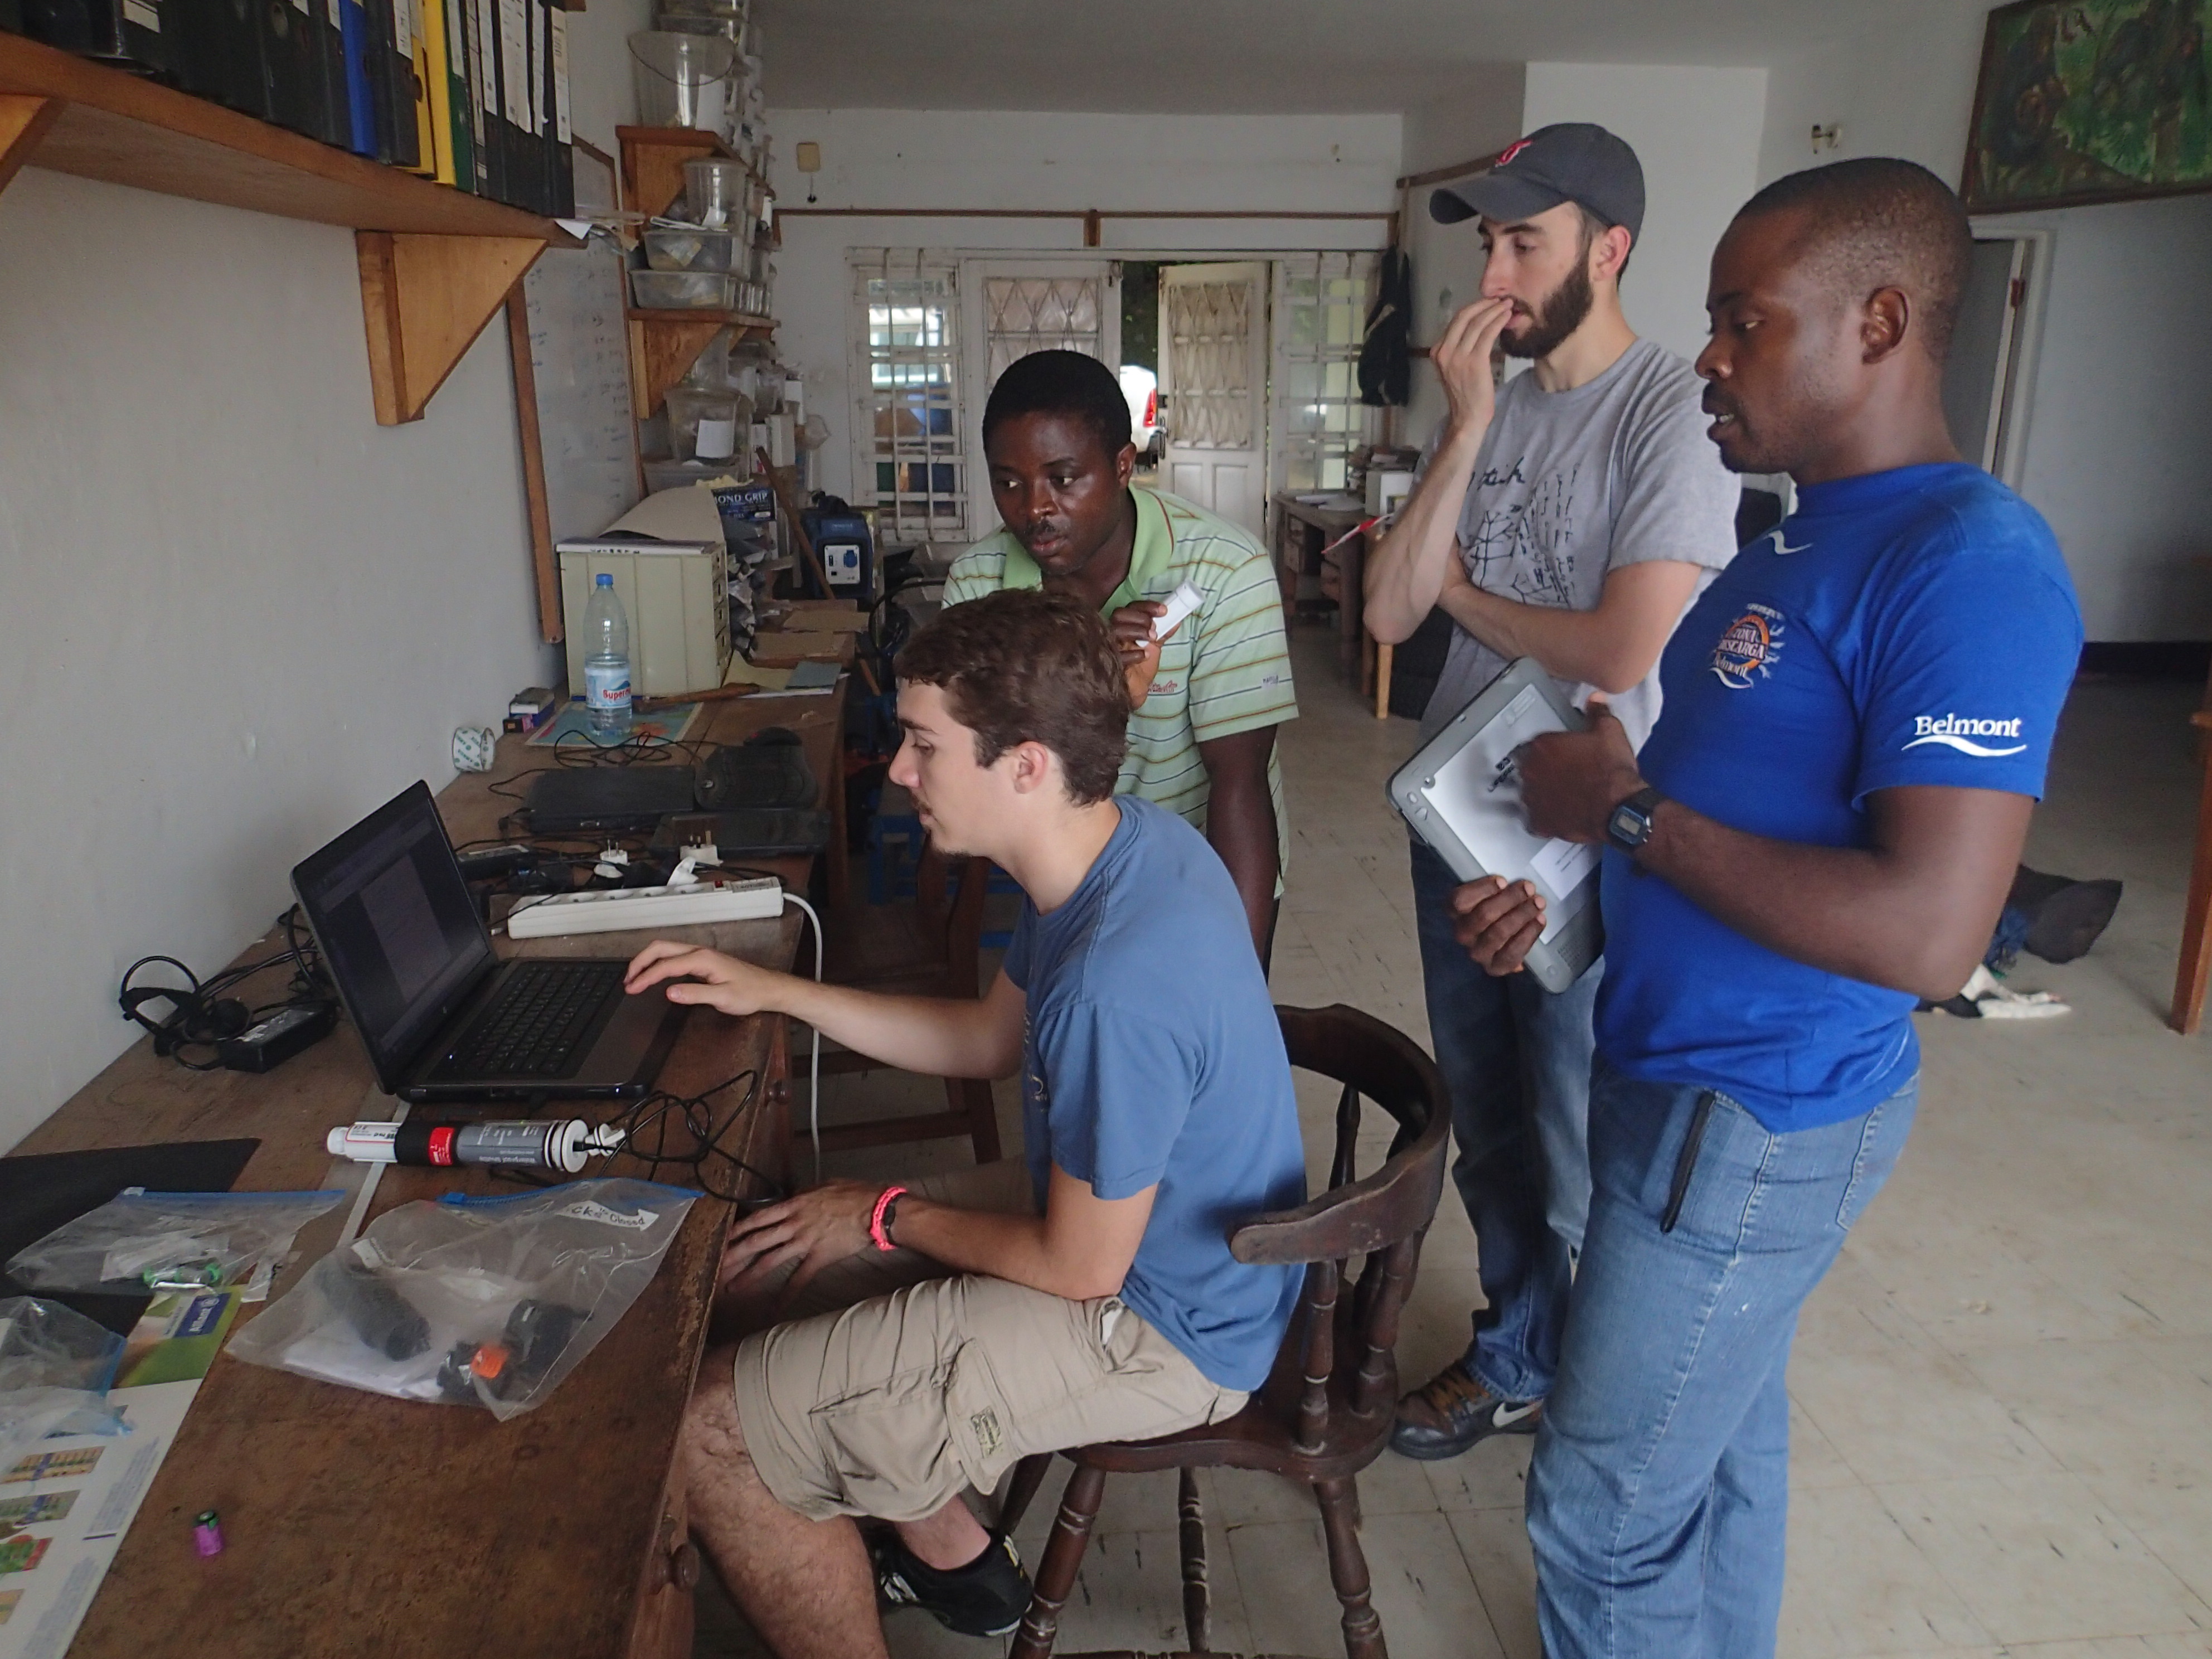 Drexel University researchers Paul Sesink Clee (seated) and Matthew Mitchell (standing, center) analyzing climate data from a field site with researchers from Ebo Forest Research Project. Credit Mary Katherine Gonder